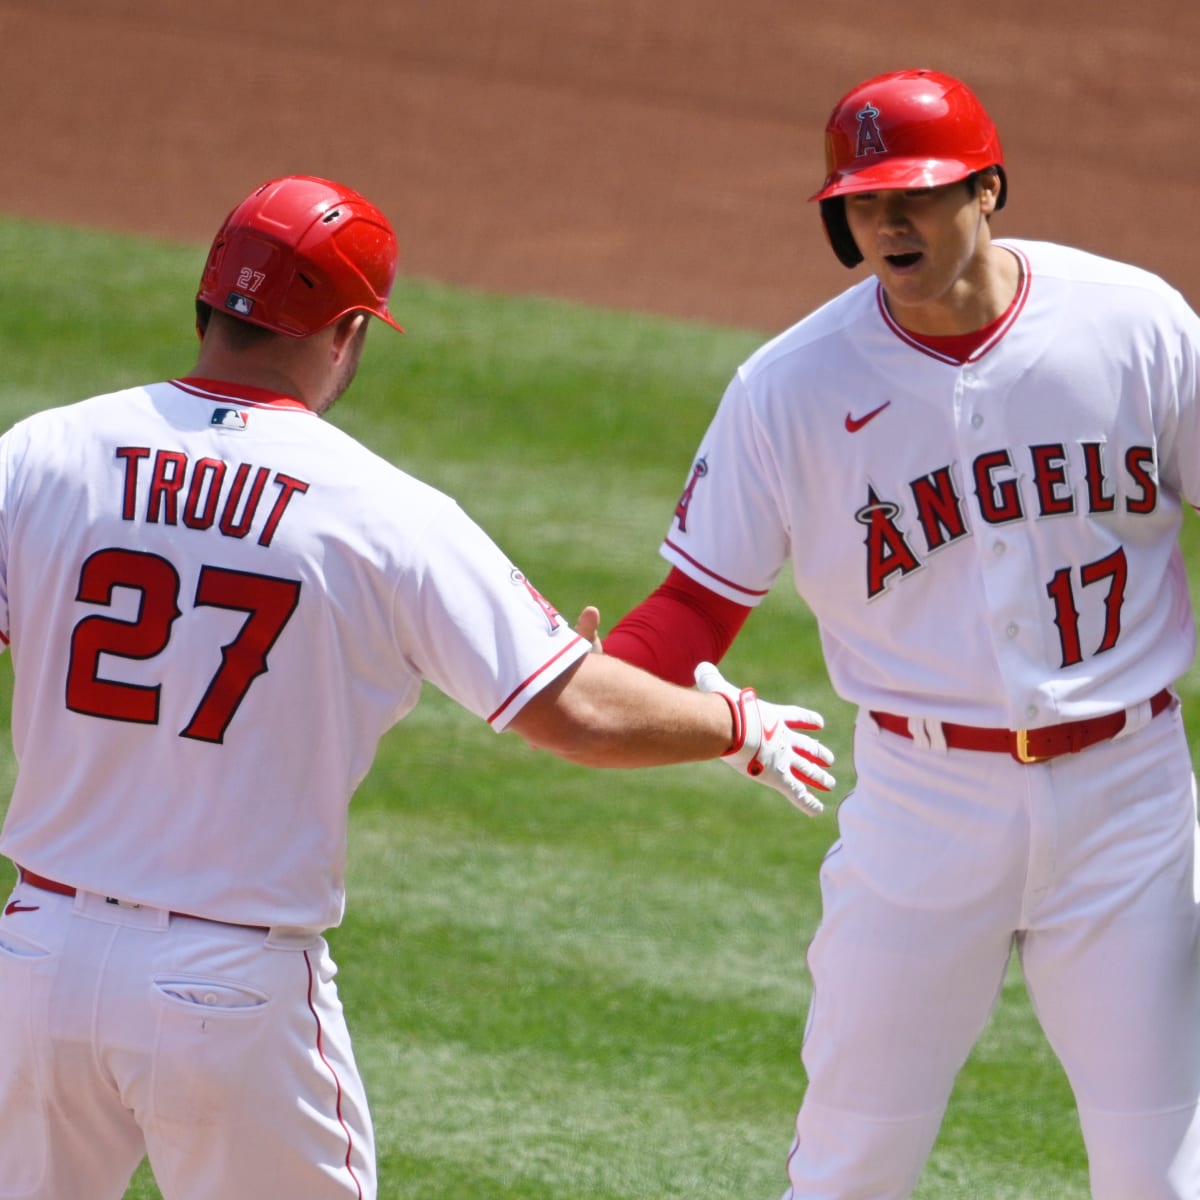 ⭐️ THEY'RE IN! ⭐️ Mike Trout (OF) and Shohei Ohtani (DH) have